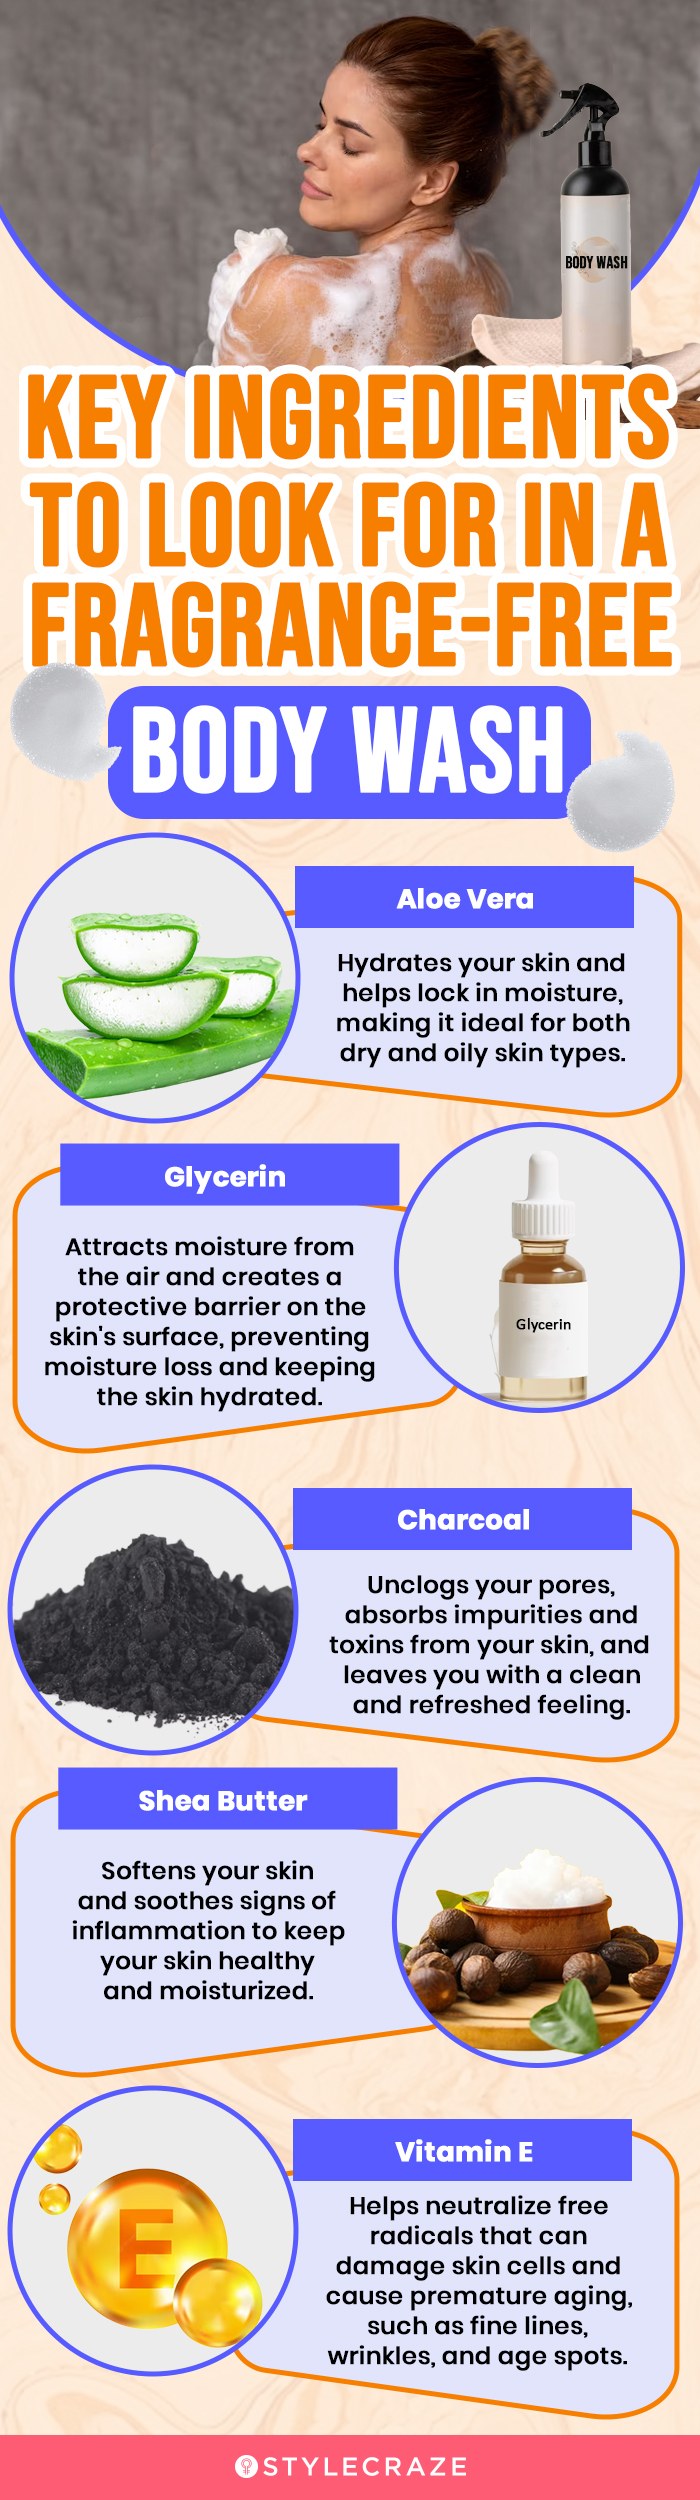 Key Ingredients To Look For In A Body Wash (infographic)